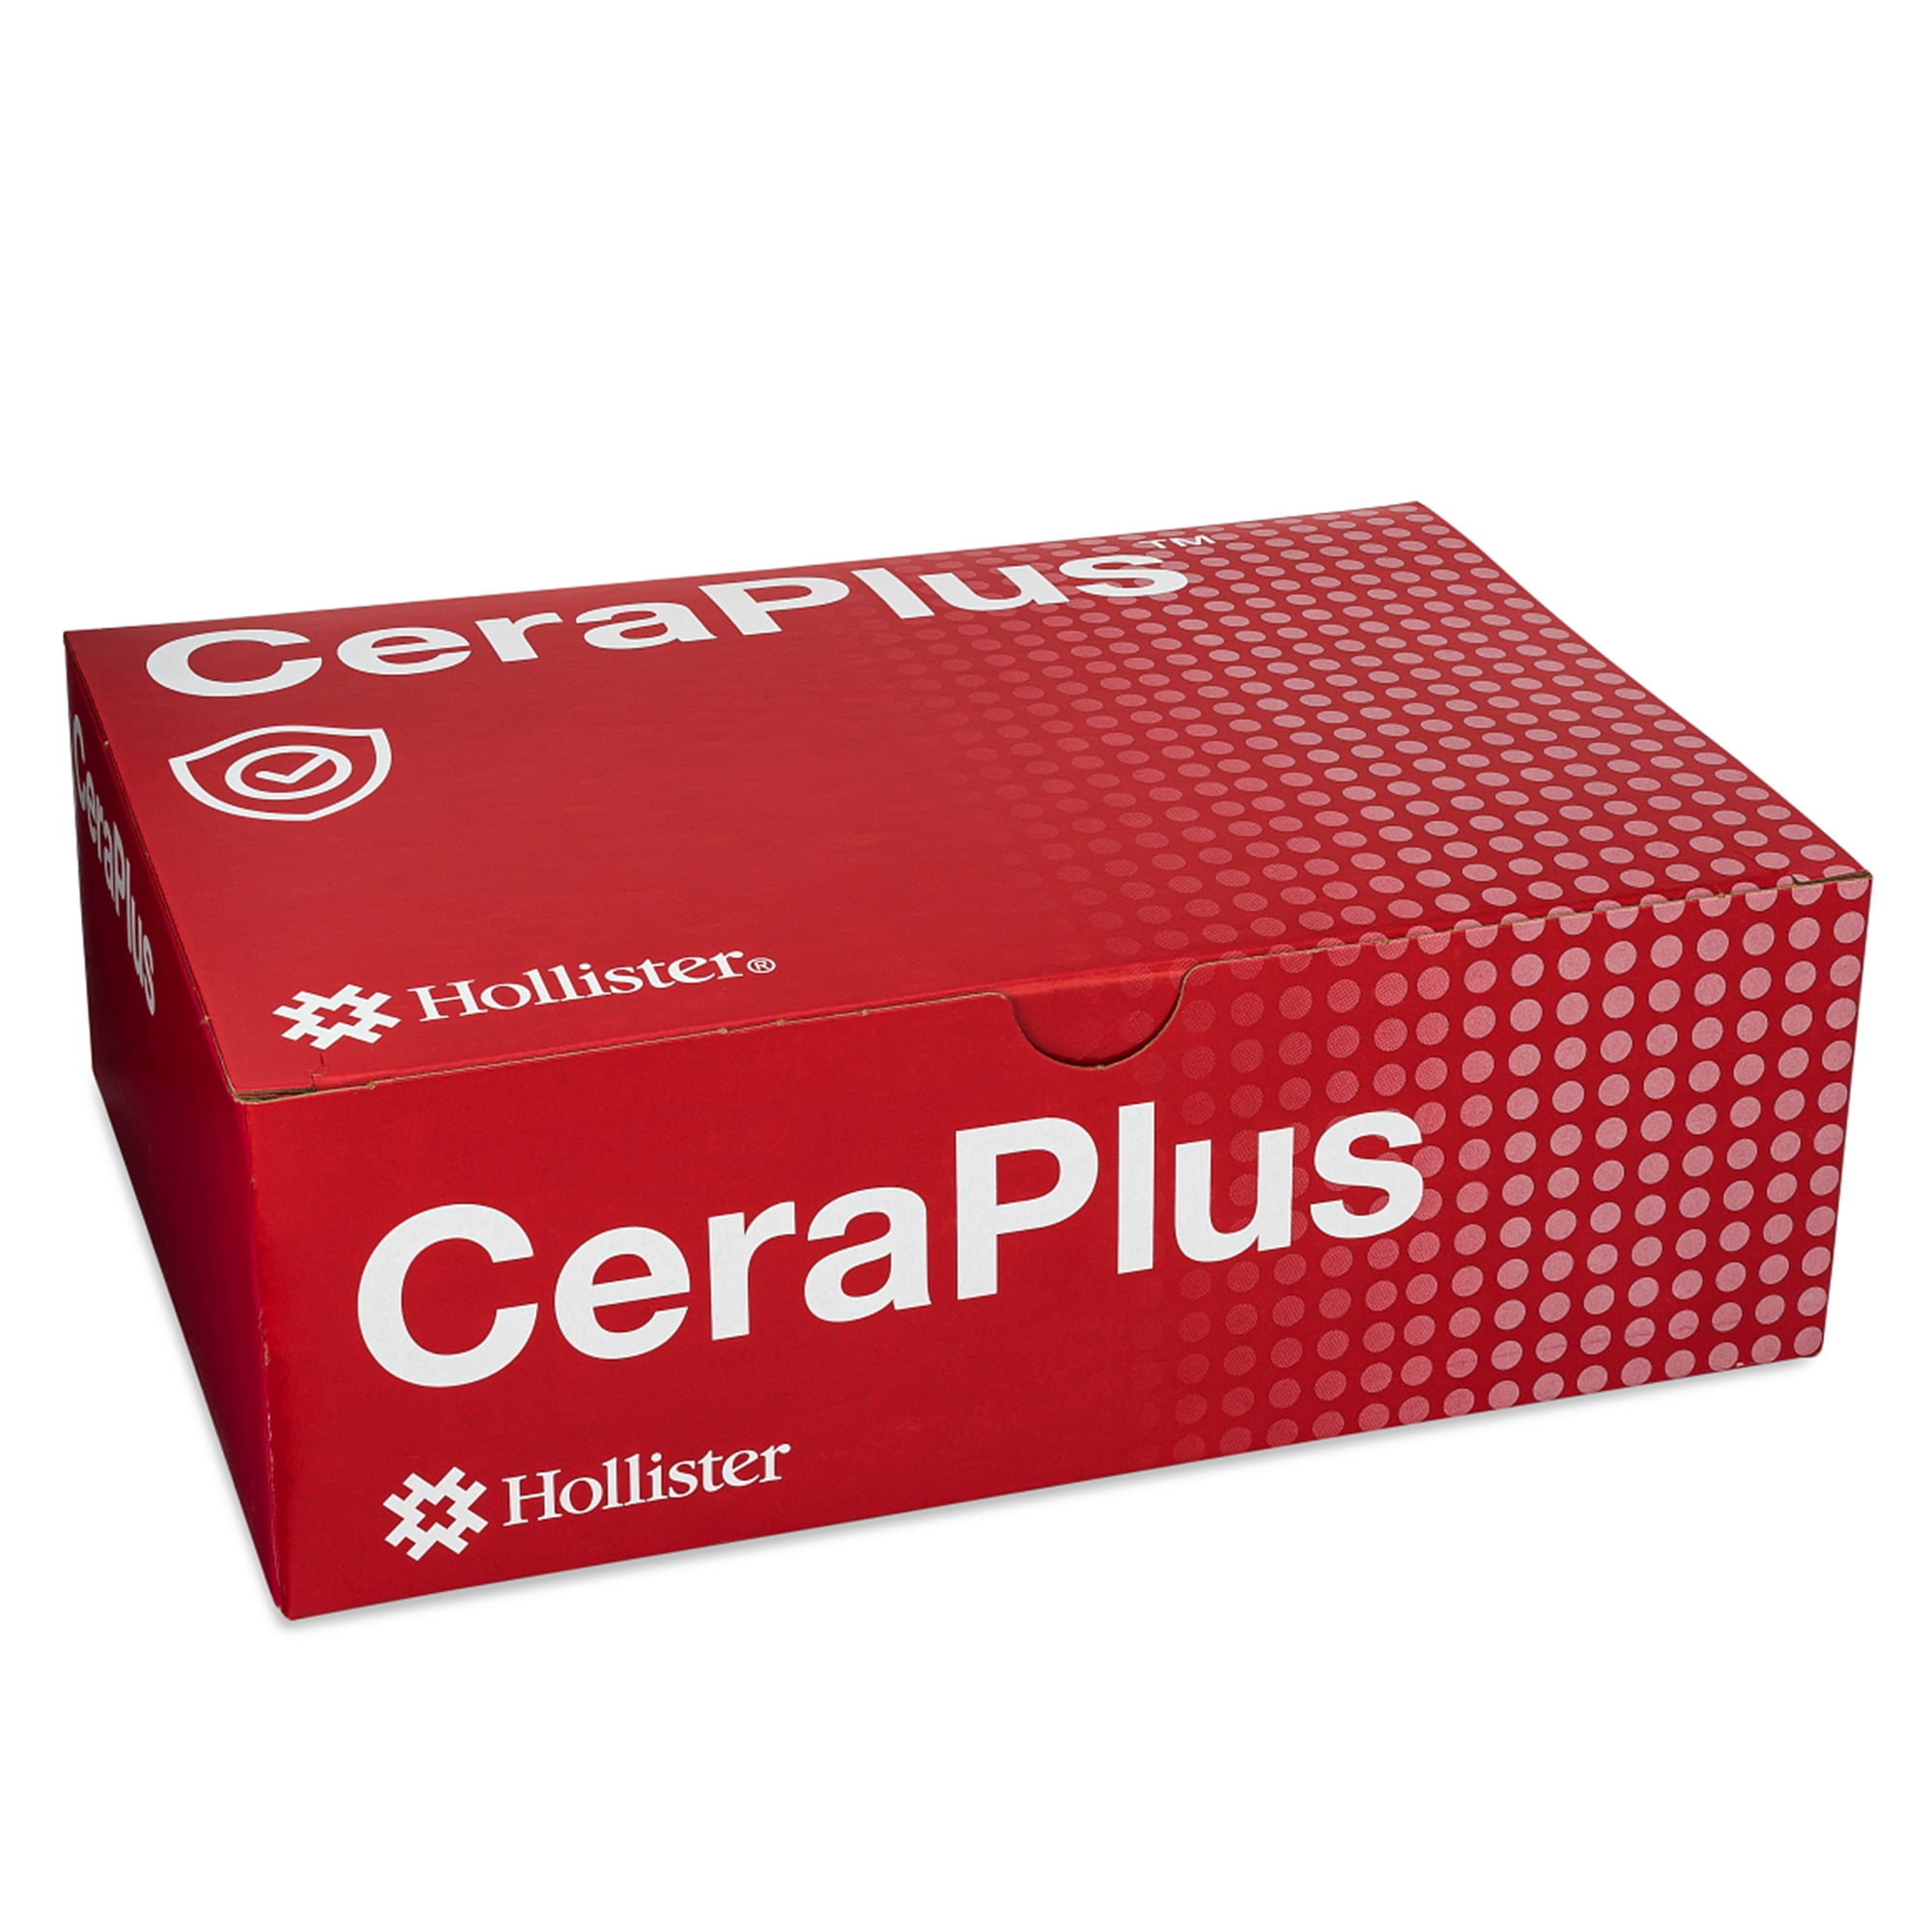 New Image CeraPlus Trim to Fit Ostomy Barrier Adhesive Tape